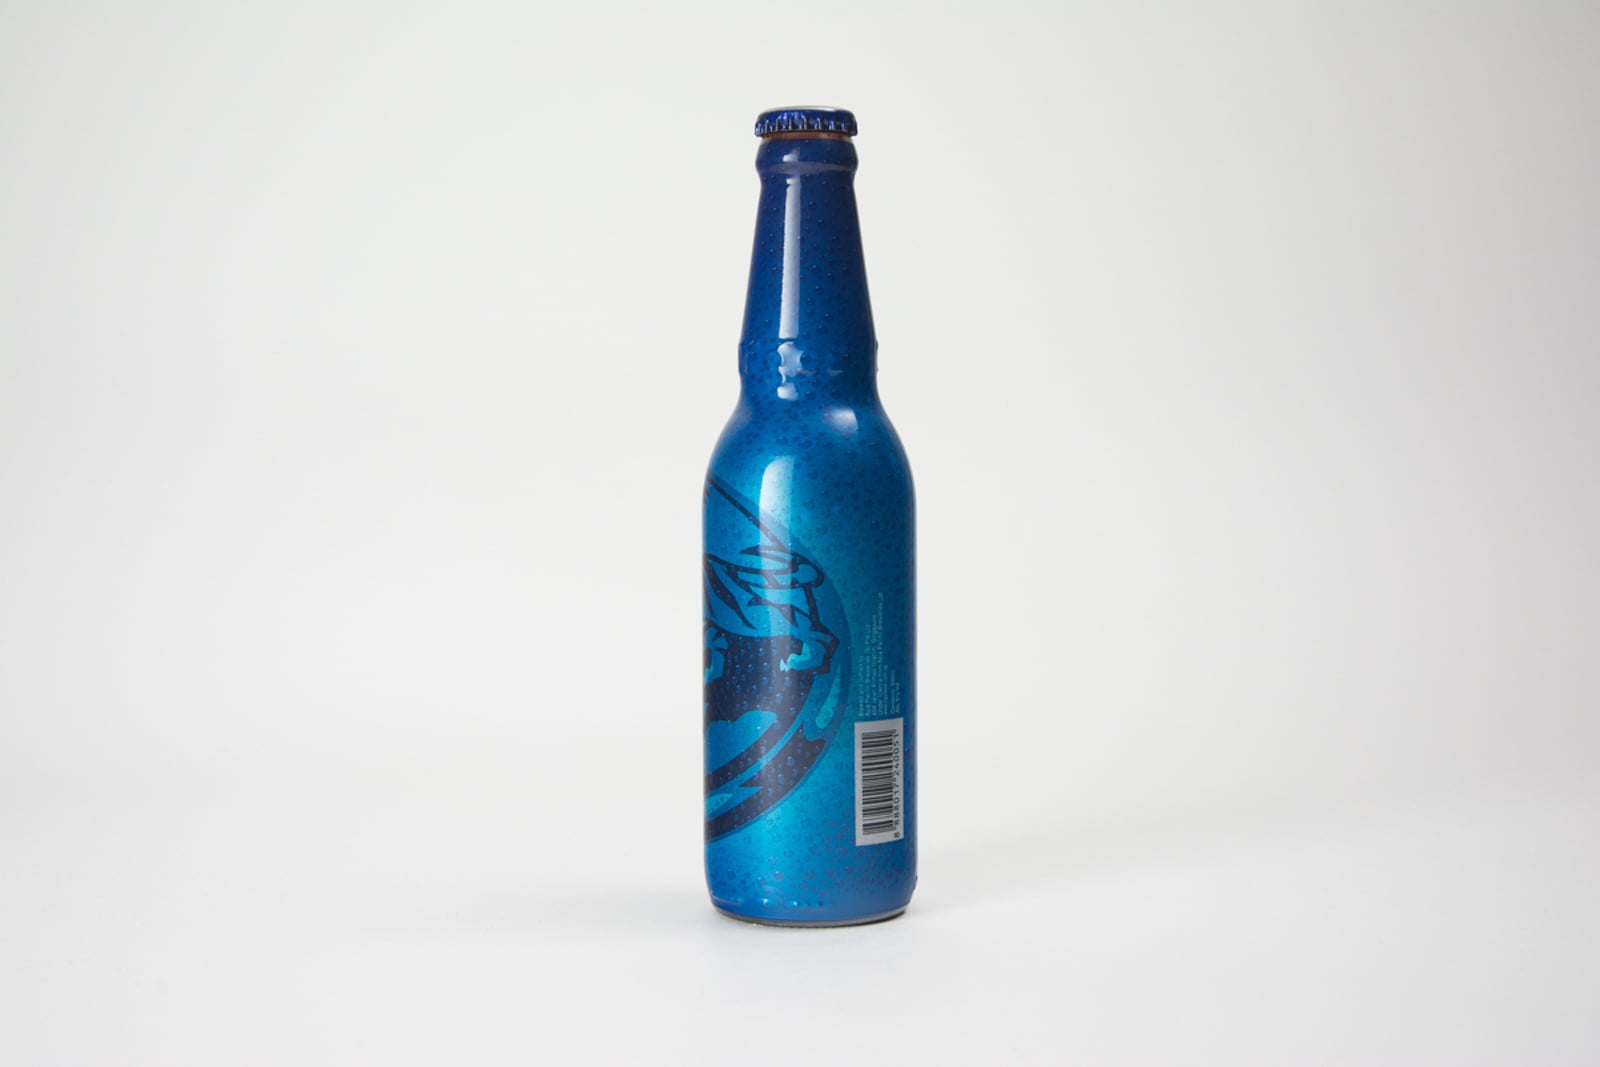 Tiger Beer Bottle In Blue Wrap With Large Logo And Yellow Text